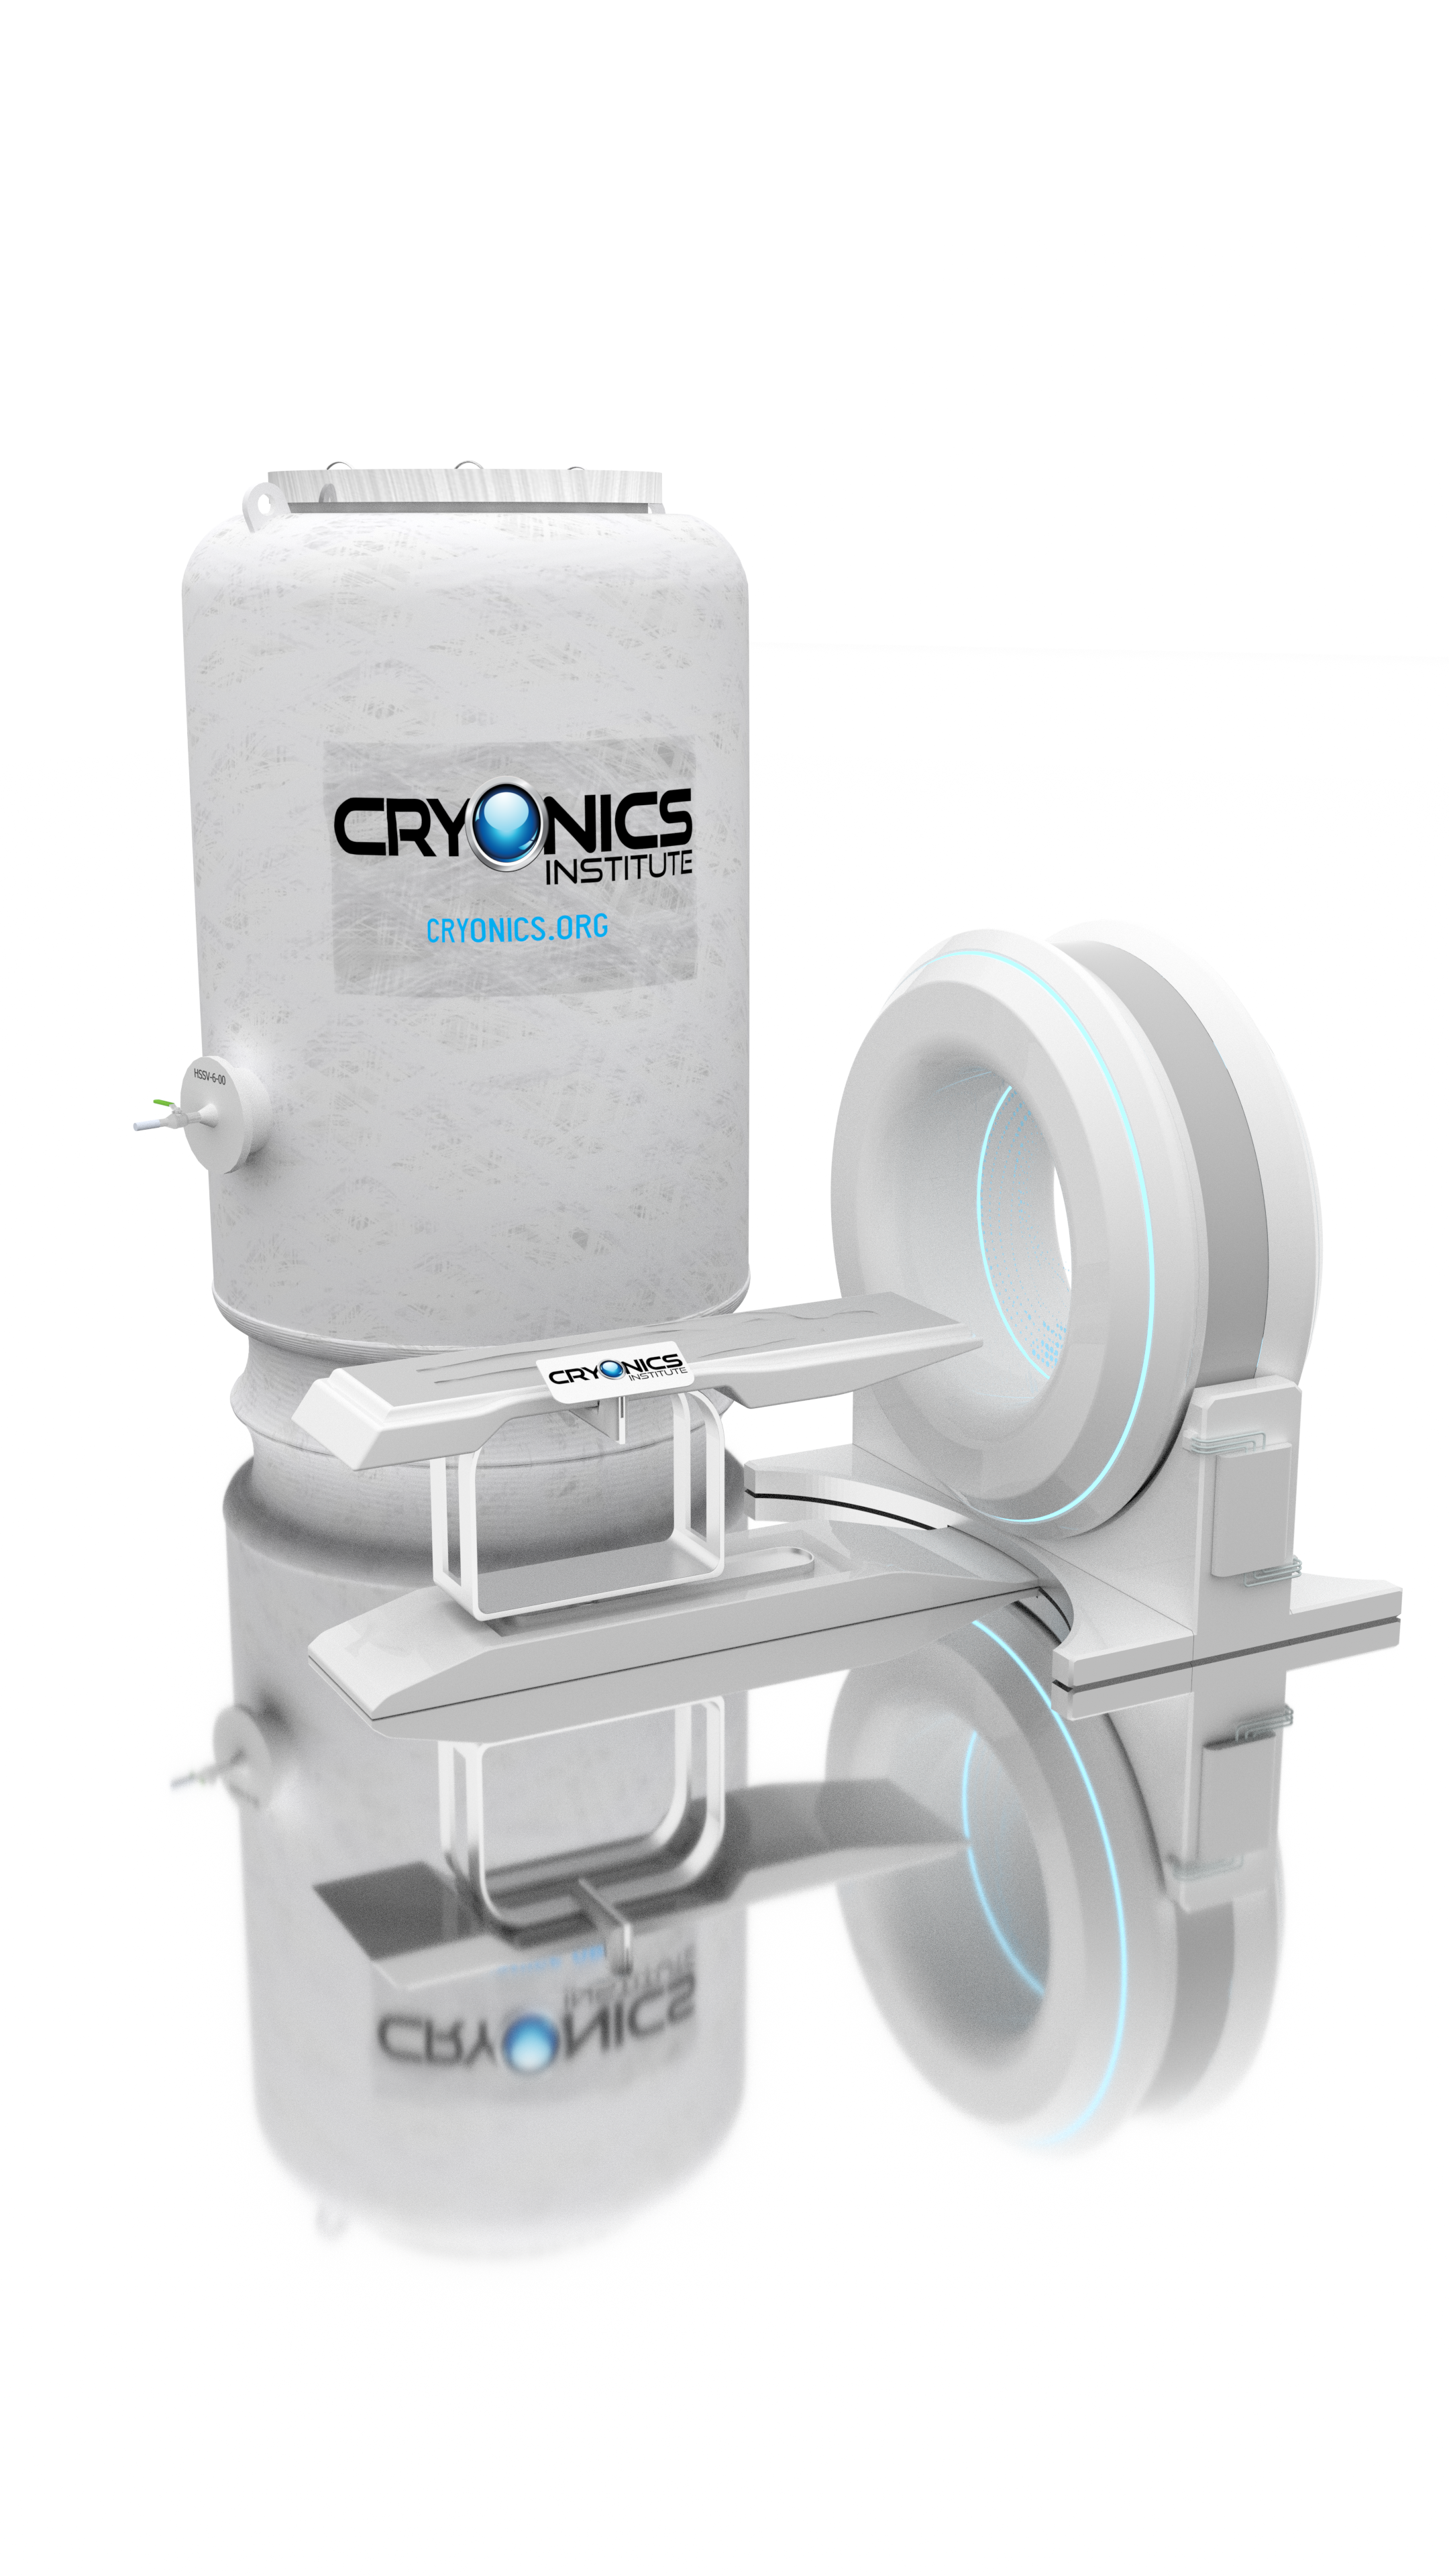 General 2160x3840 Cryonics Institute Cryonics technology